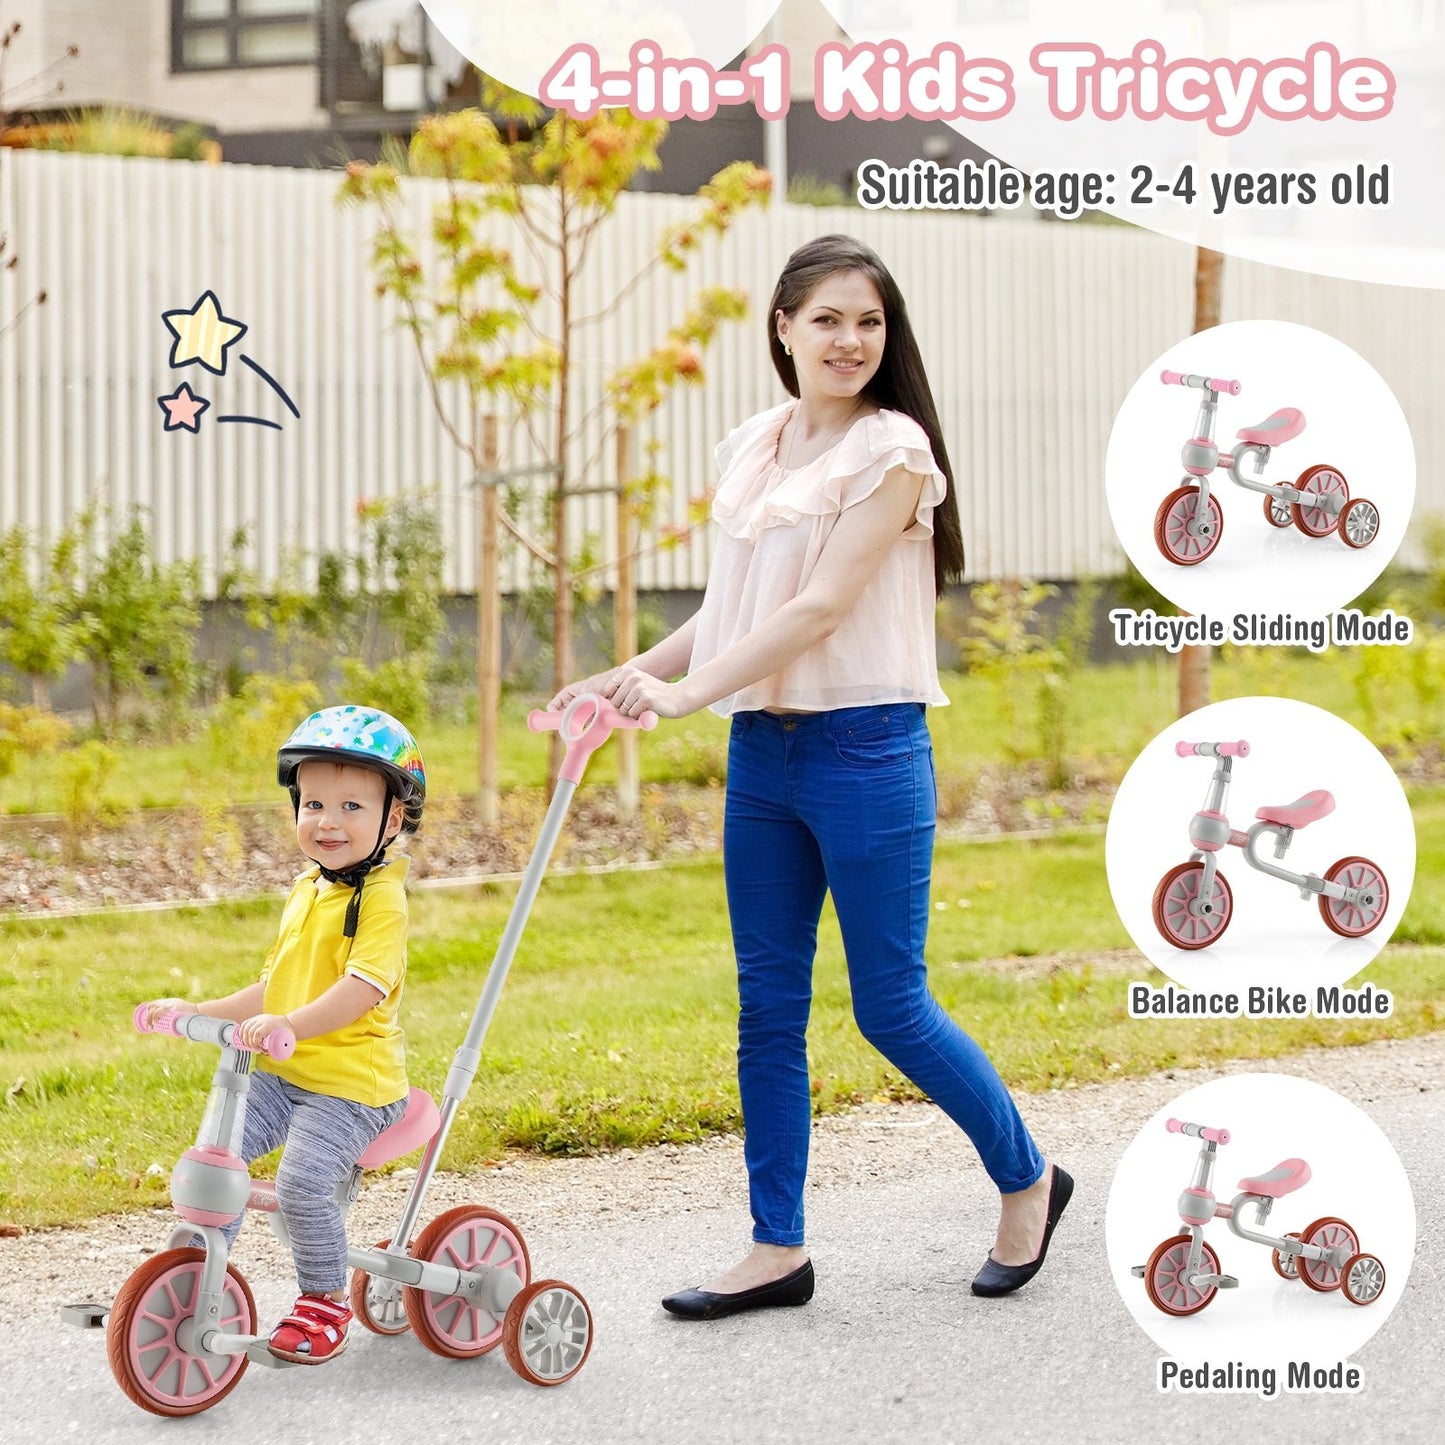 4-in-1 Kids Trike Bike with Adjustable Parent Push Handle and Seat Height, Pink